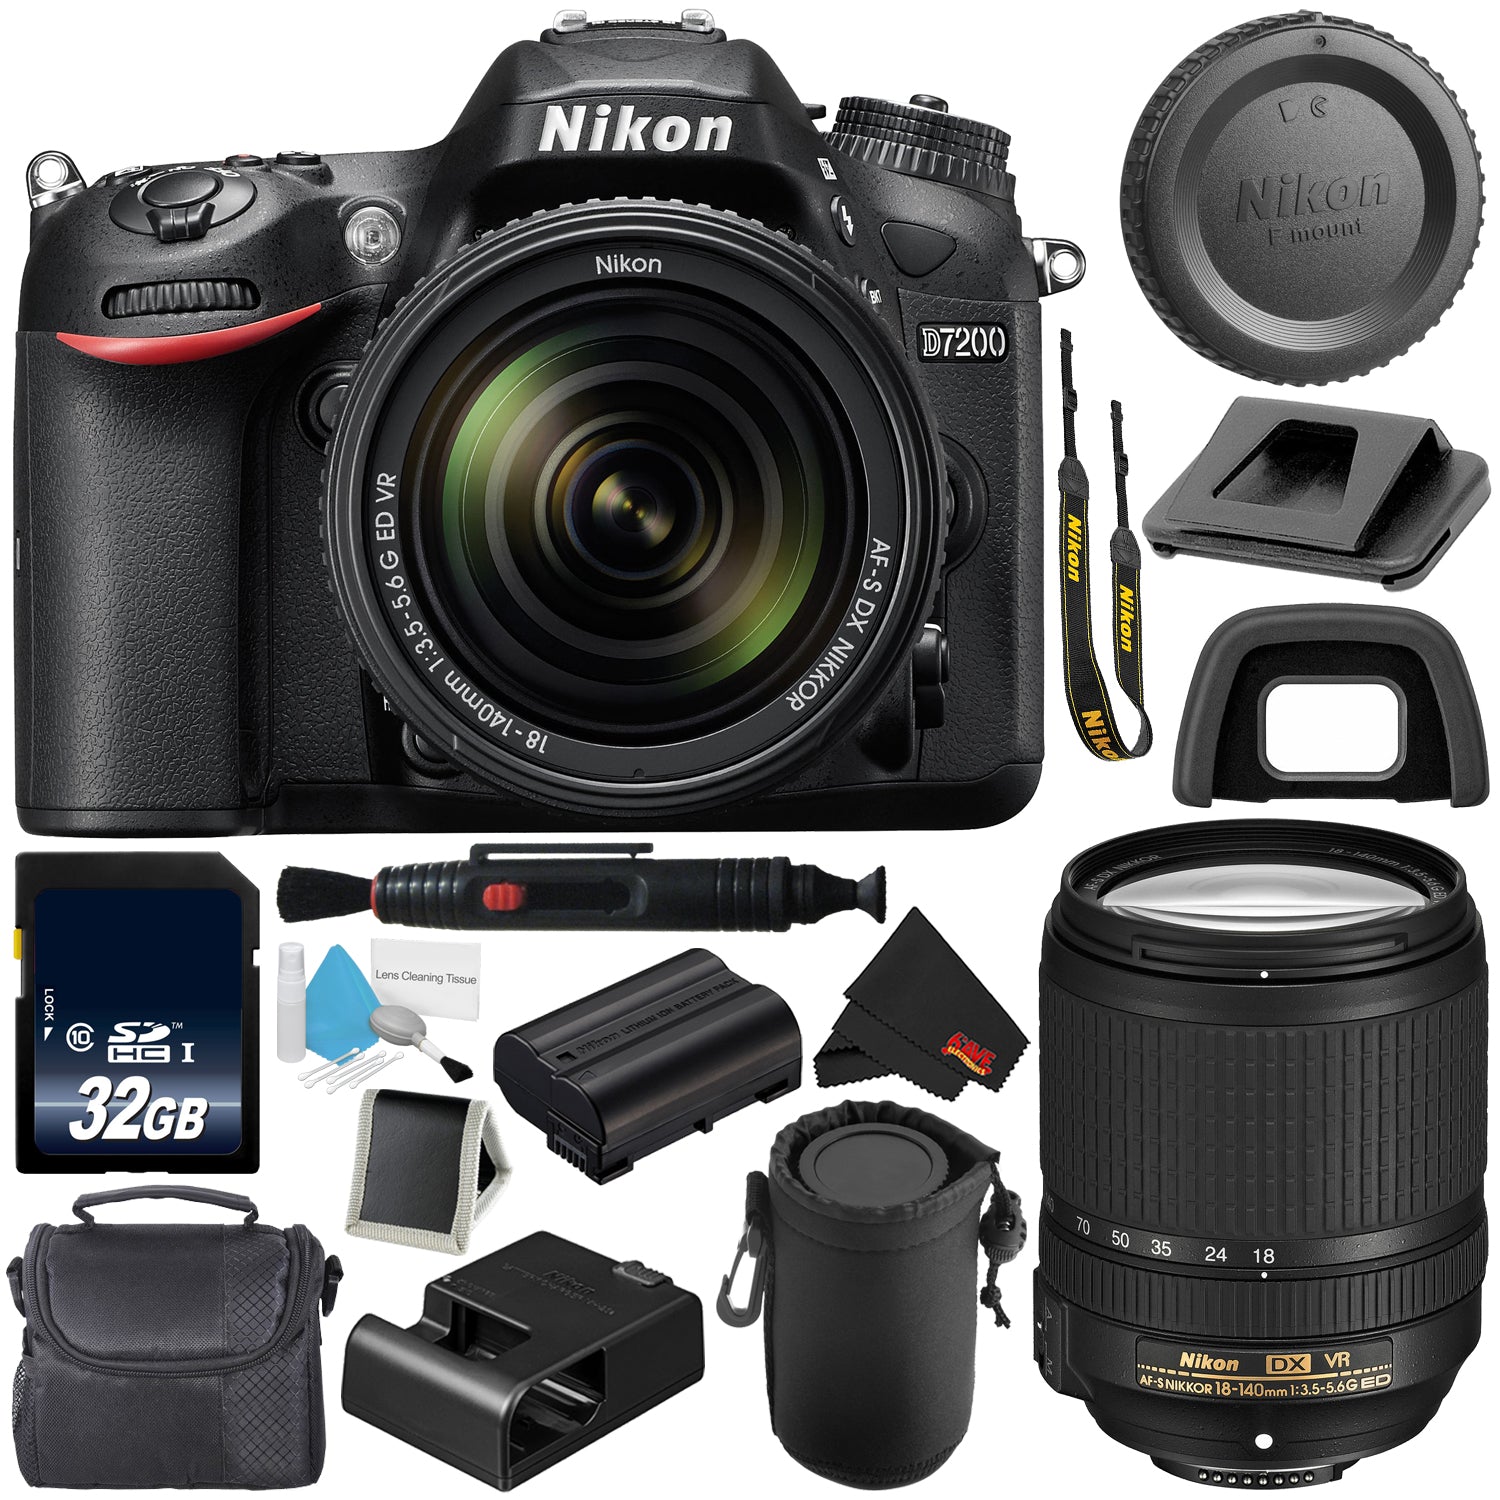 Nikon D7200 DSLR Camera with 18-140mm Lens 1555 (International Model) + 32GB SDHC Class 10 Memory Card + Deluxe Cleaning Kit + Memory Card Wallet + MicroFiber Cloth + Lens Pen Cleaner Bundle